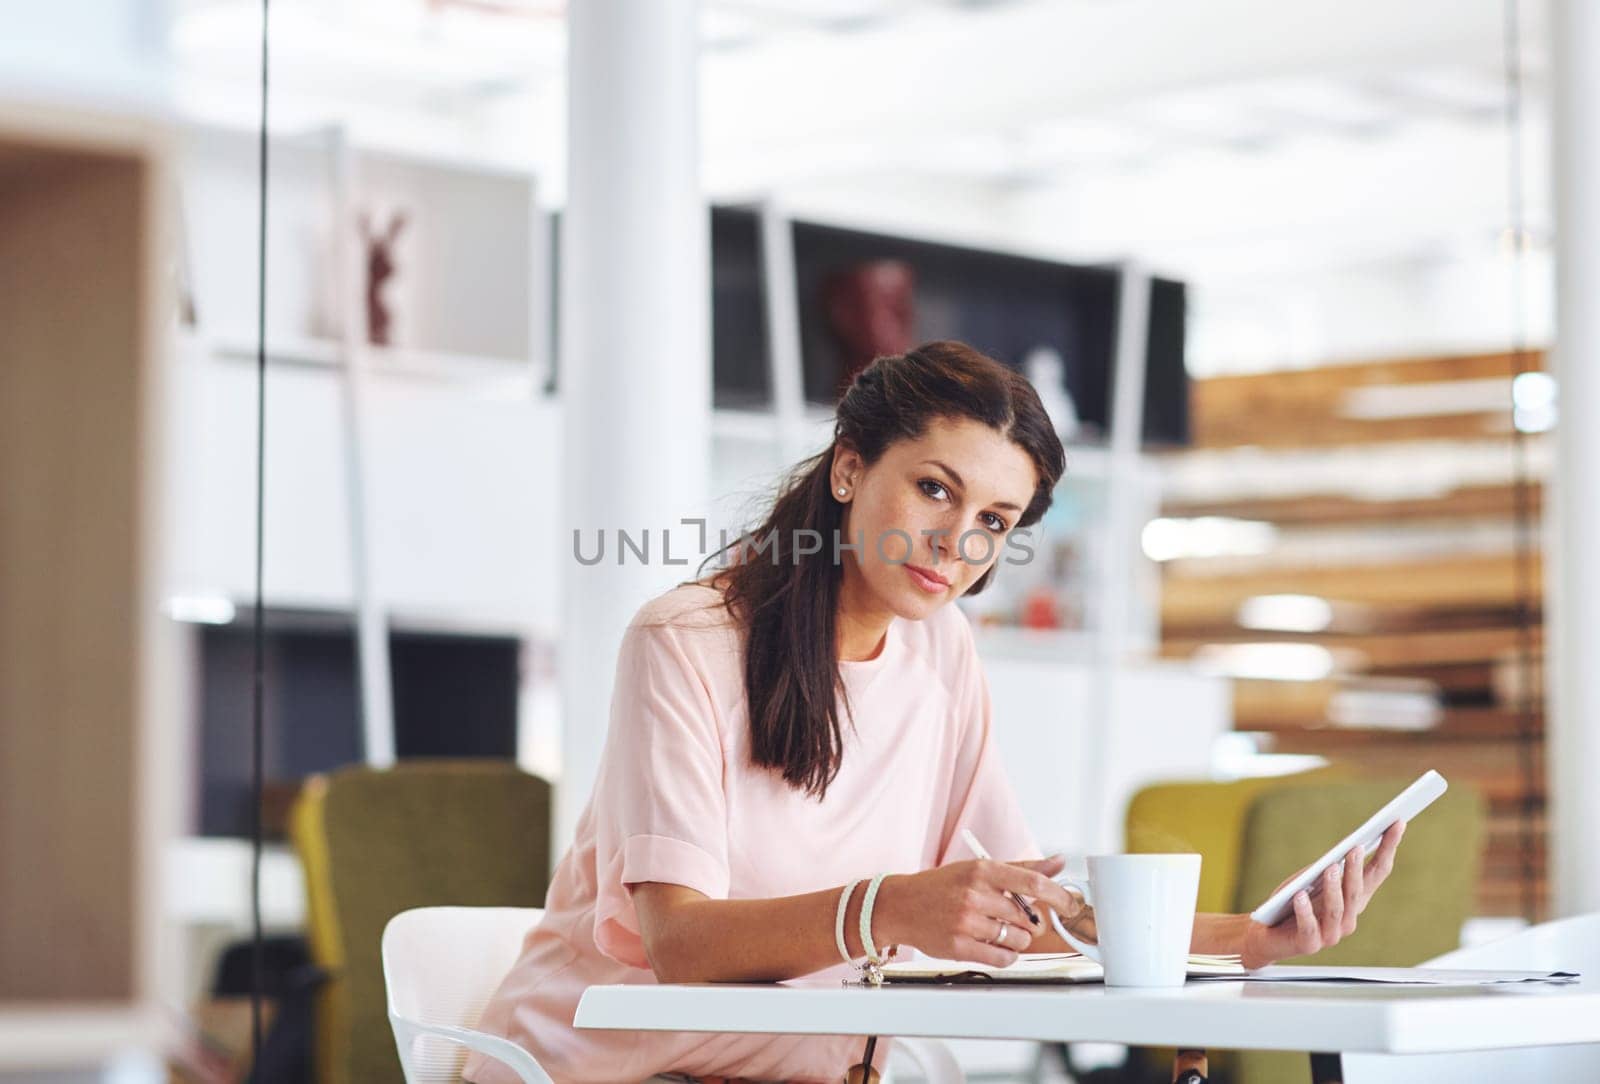 This tablet has really made business easy. Cropped portrait of a young businsswoman using a digital tablet at her desk in the office